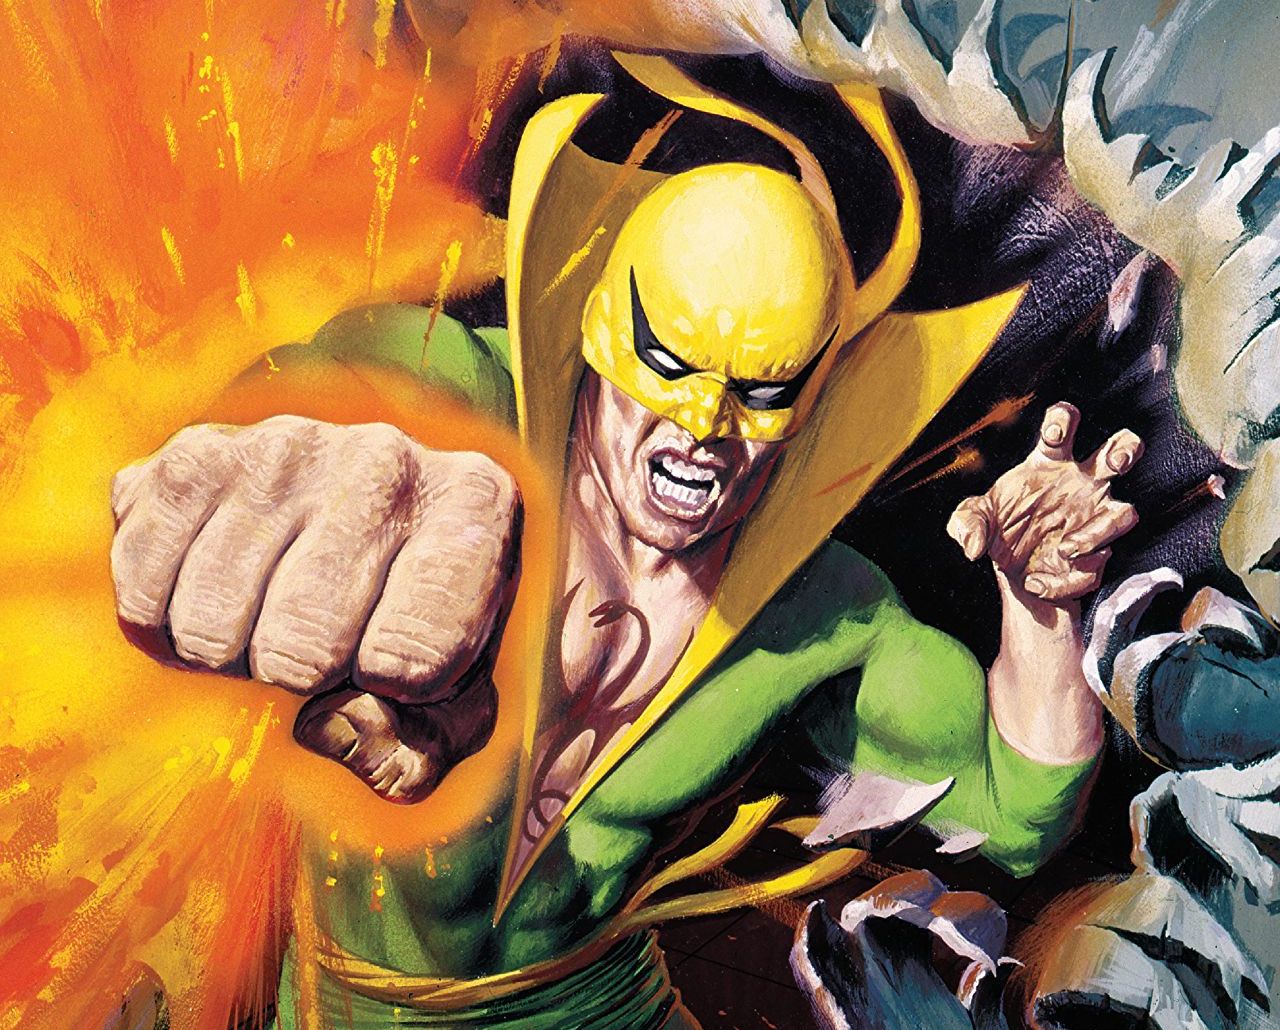 3 Reasons Why 'Iron Fist: Deadly Hands of Kung Fu - The Complete Collection' withstands the test of time